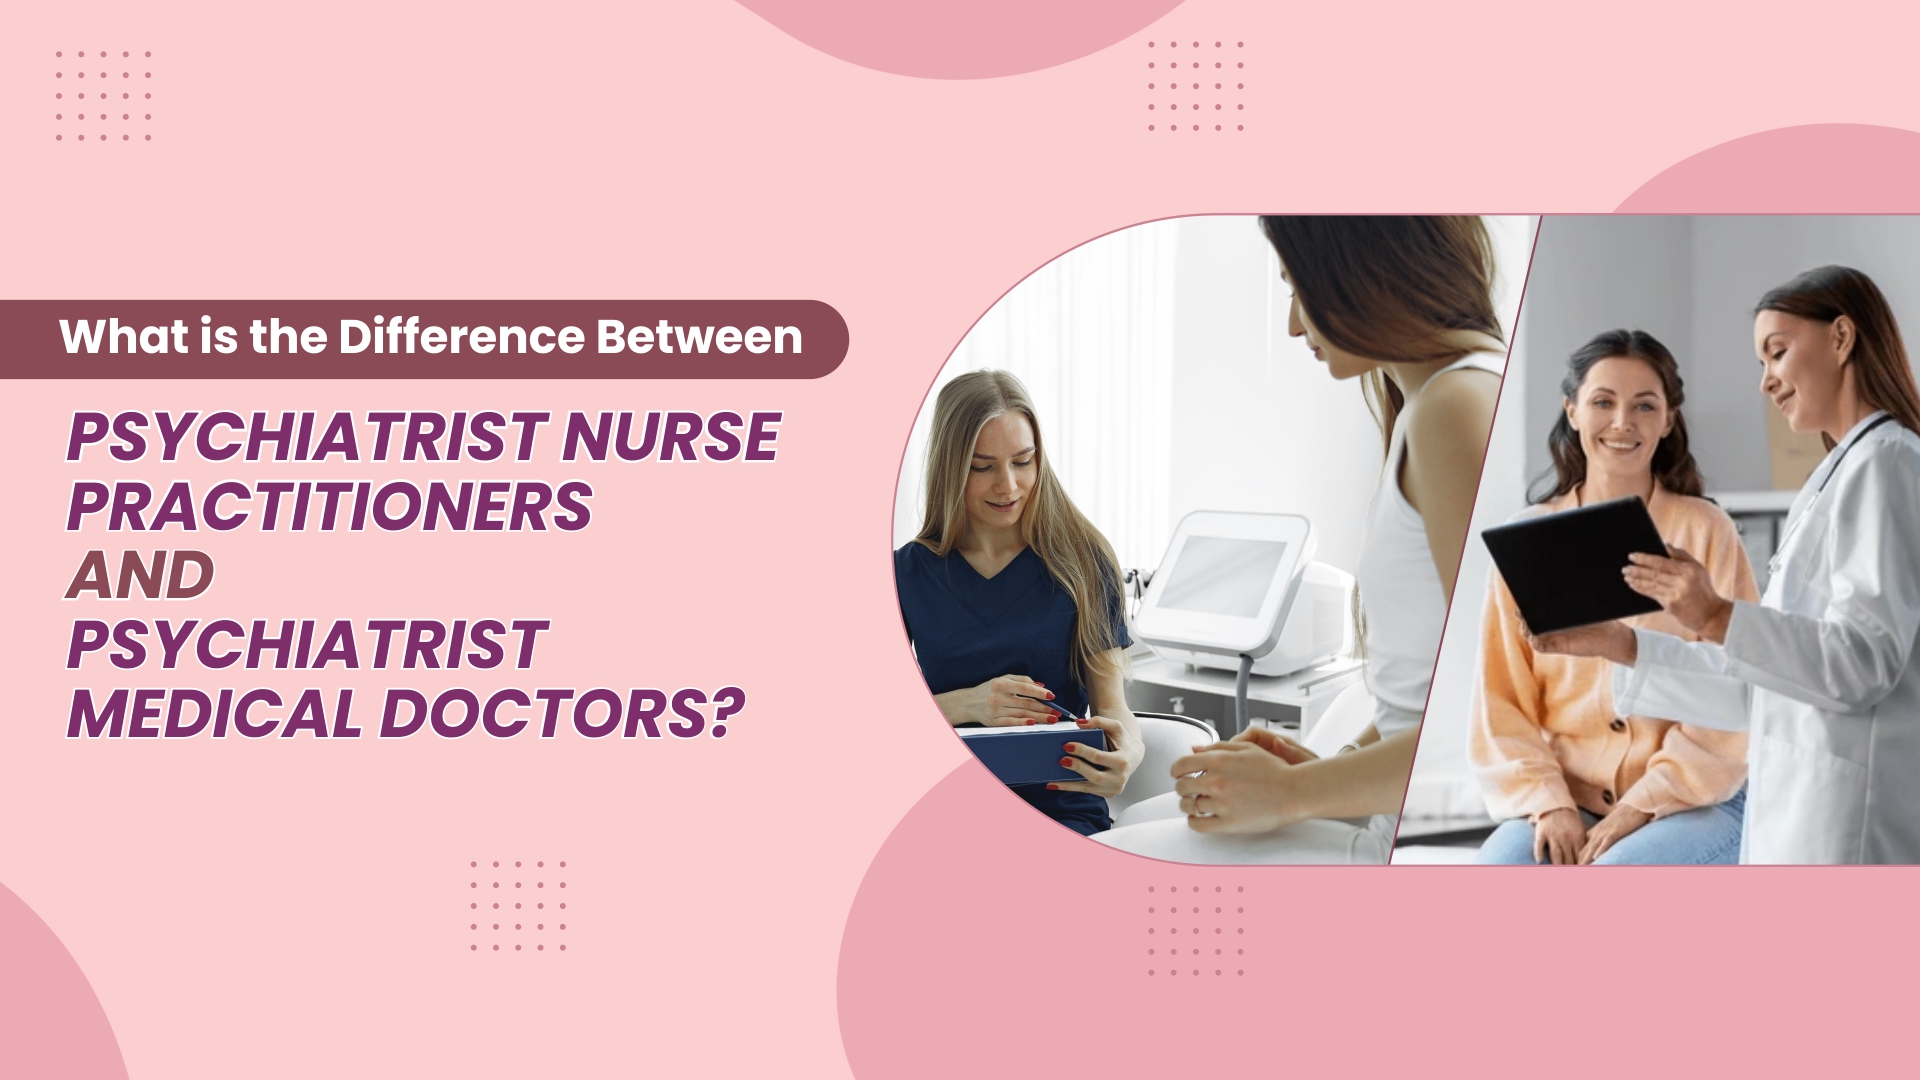 What is the Difference Between Psychiatrist Nurse Practitioners and Psychiatrist Medical Doctors?